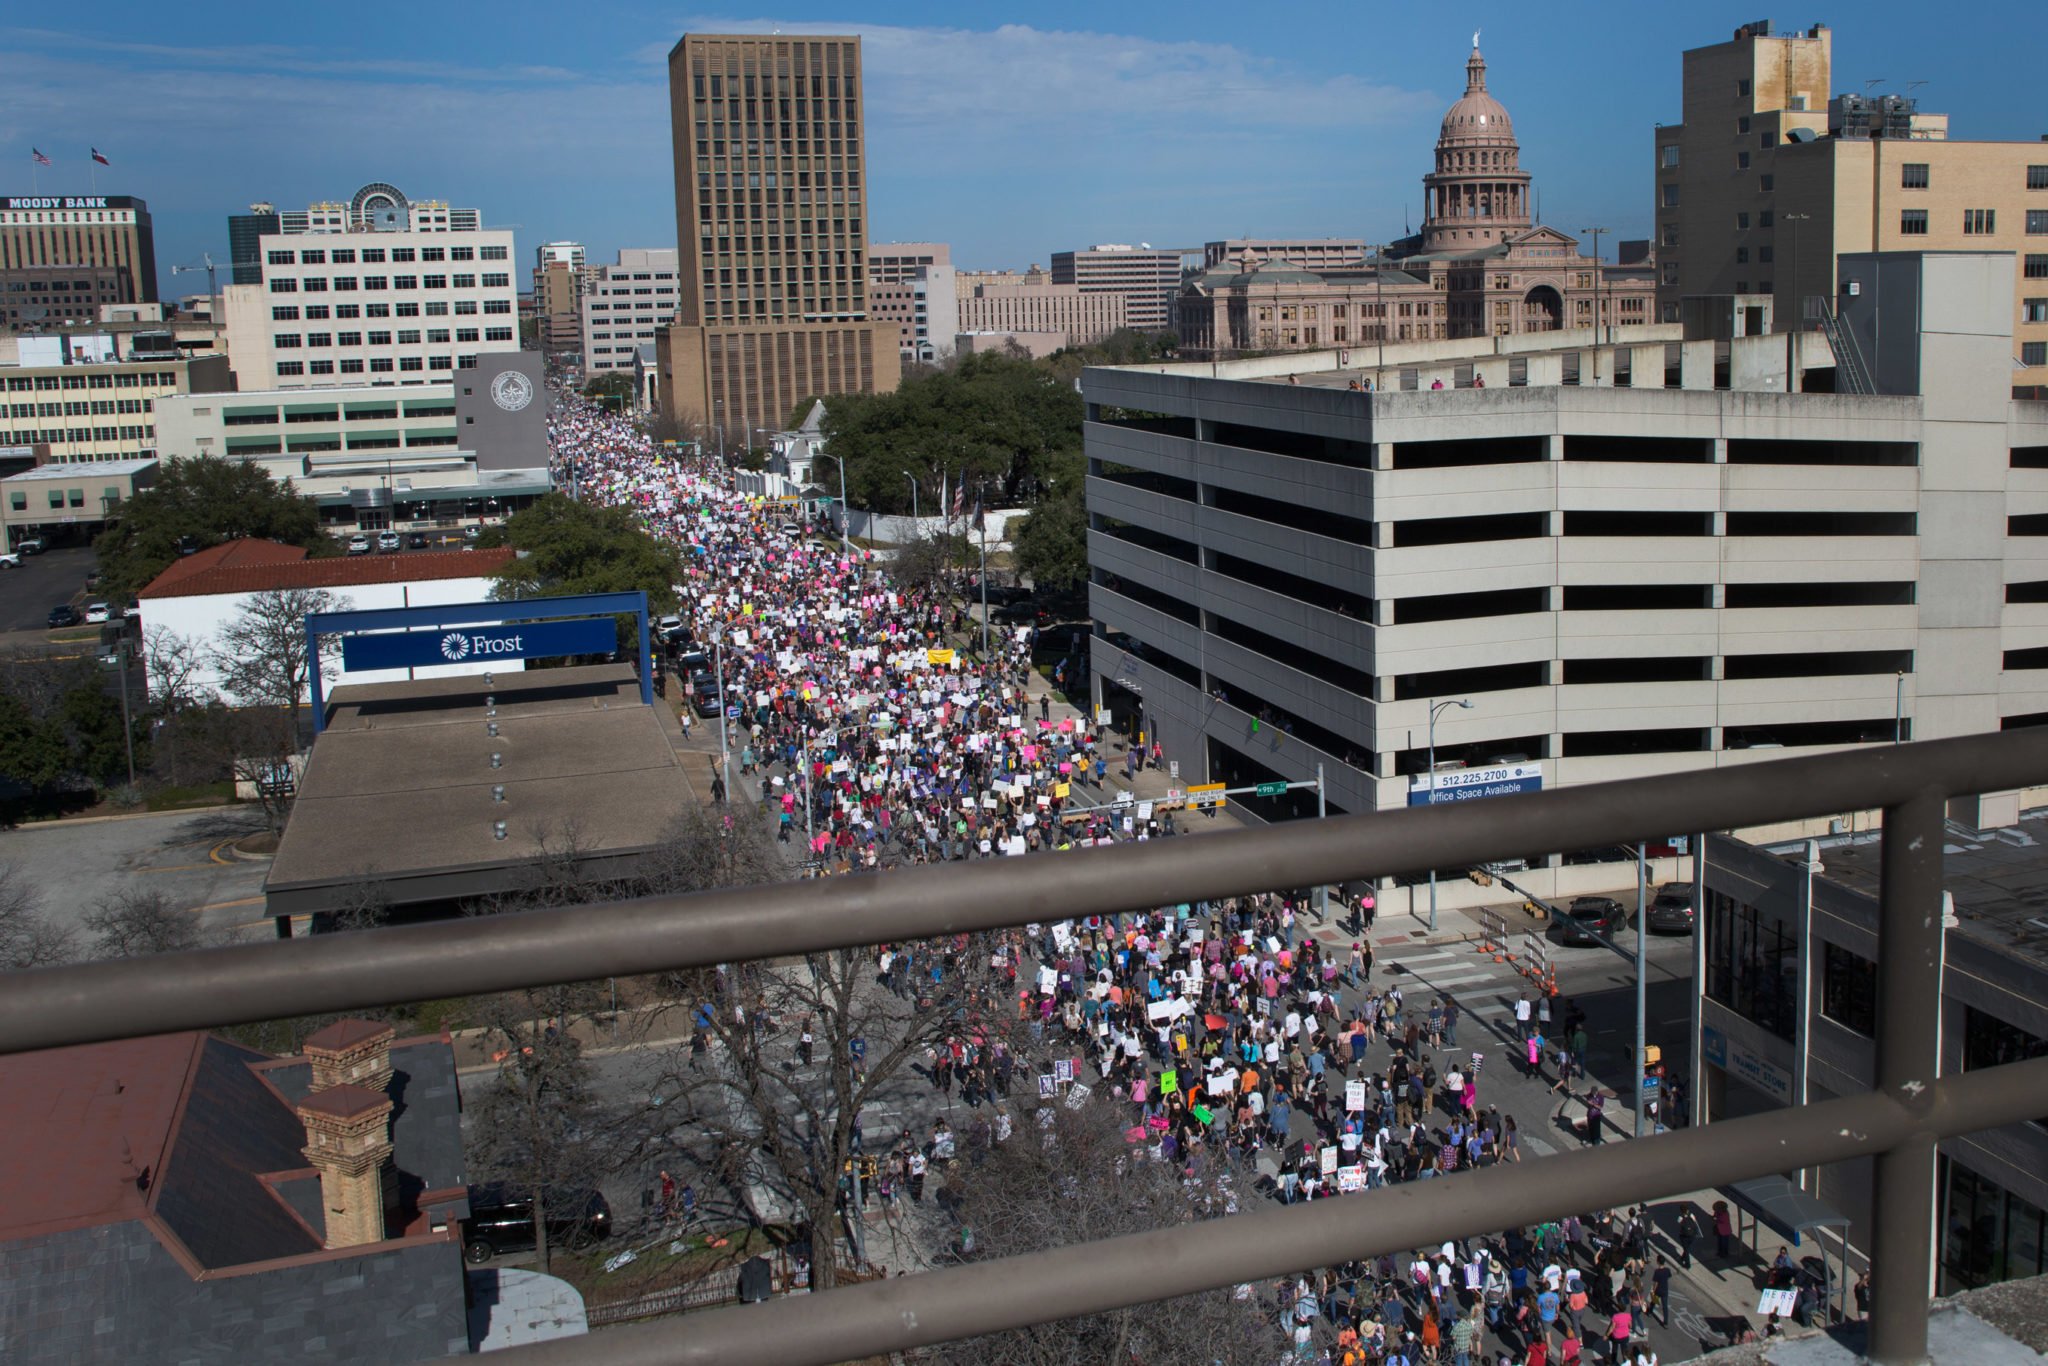 Officials estimate more than 40,000 people marched through the streets of Austin to protest the inauguration of President Donald Trump.